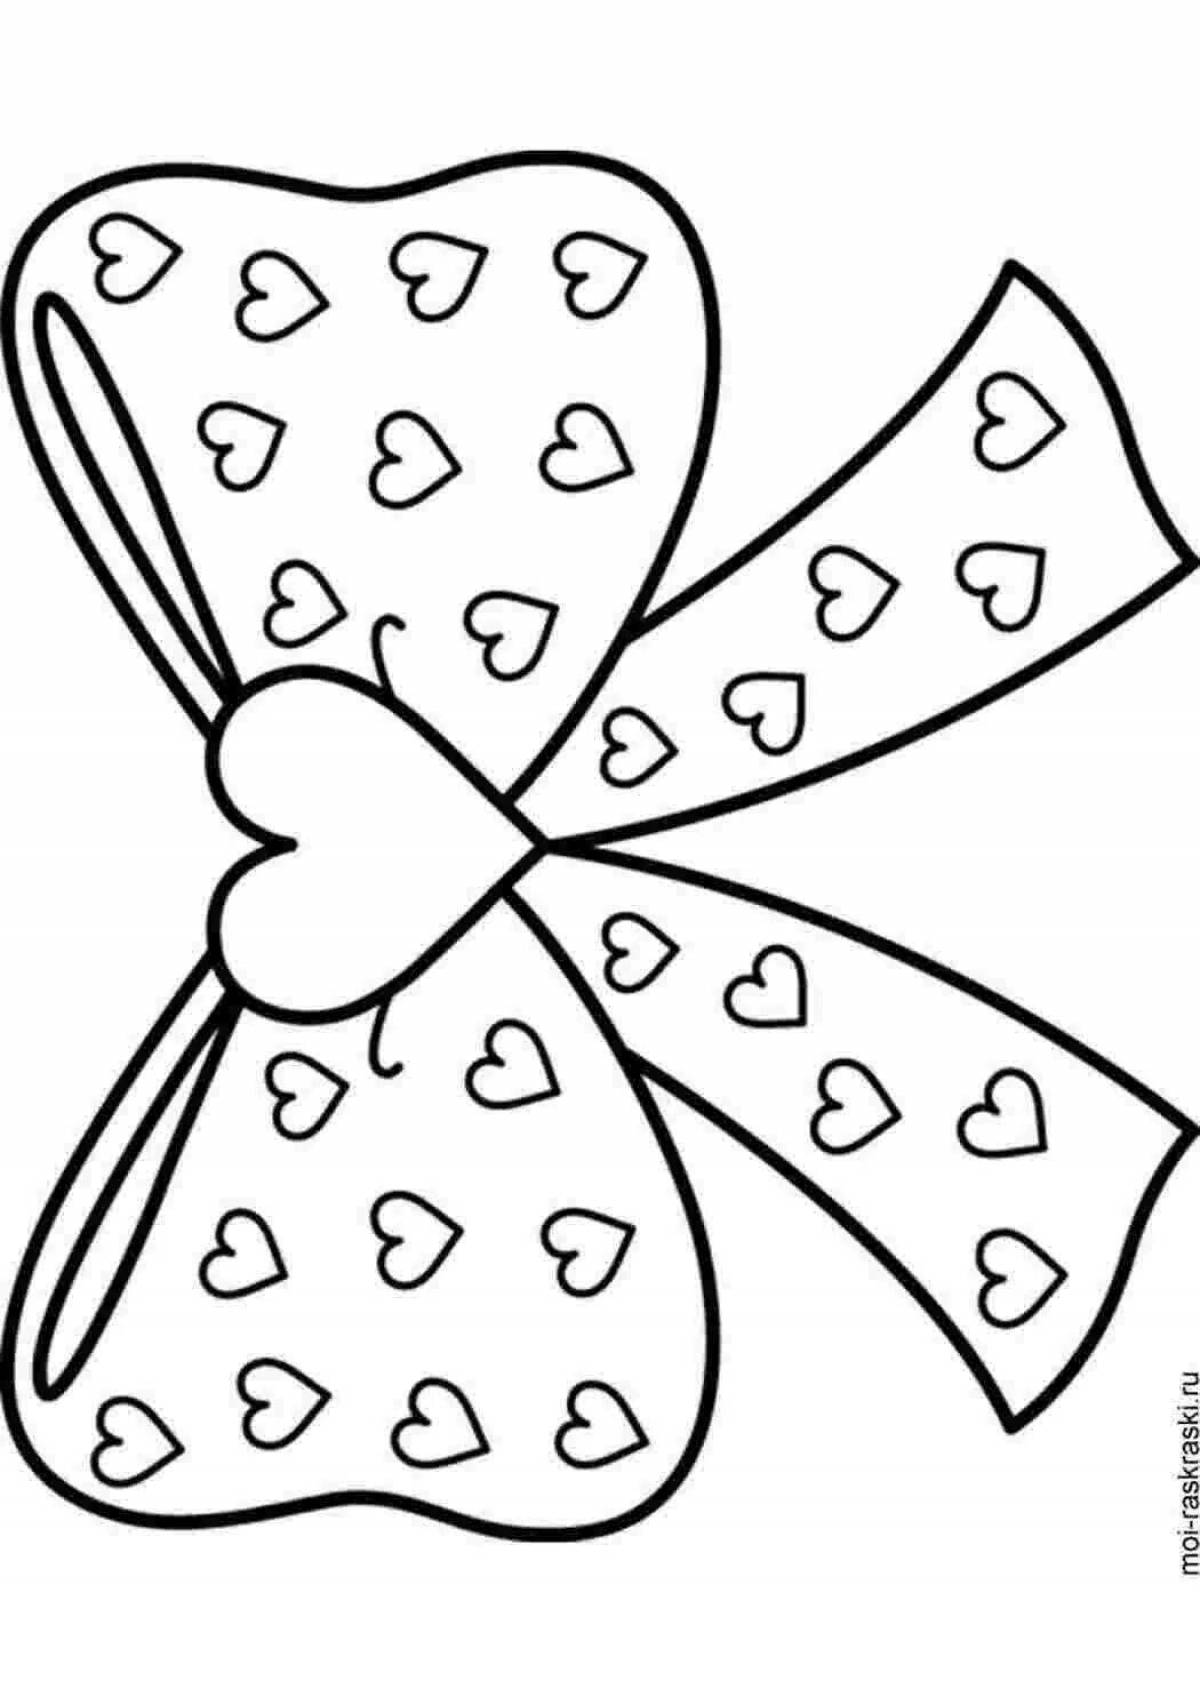 Coloring book shining bow for children